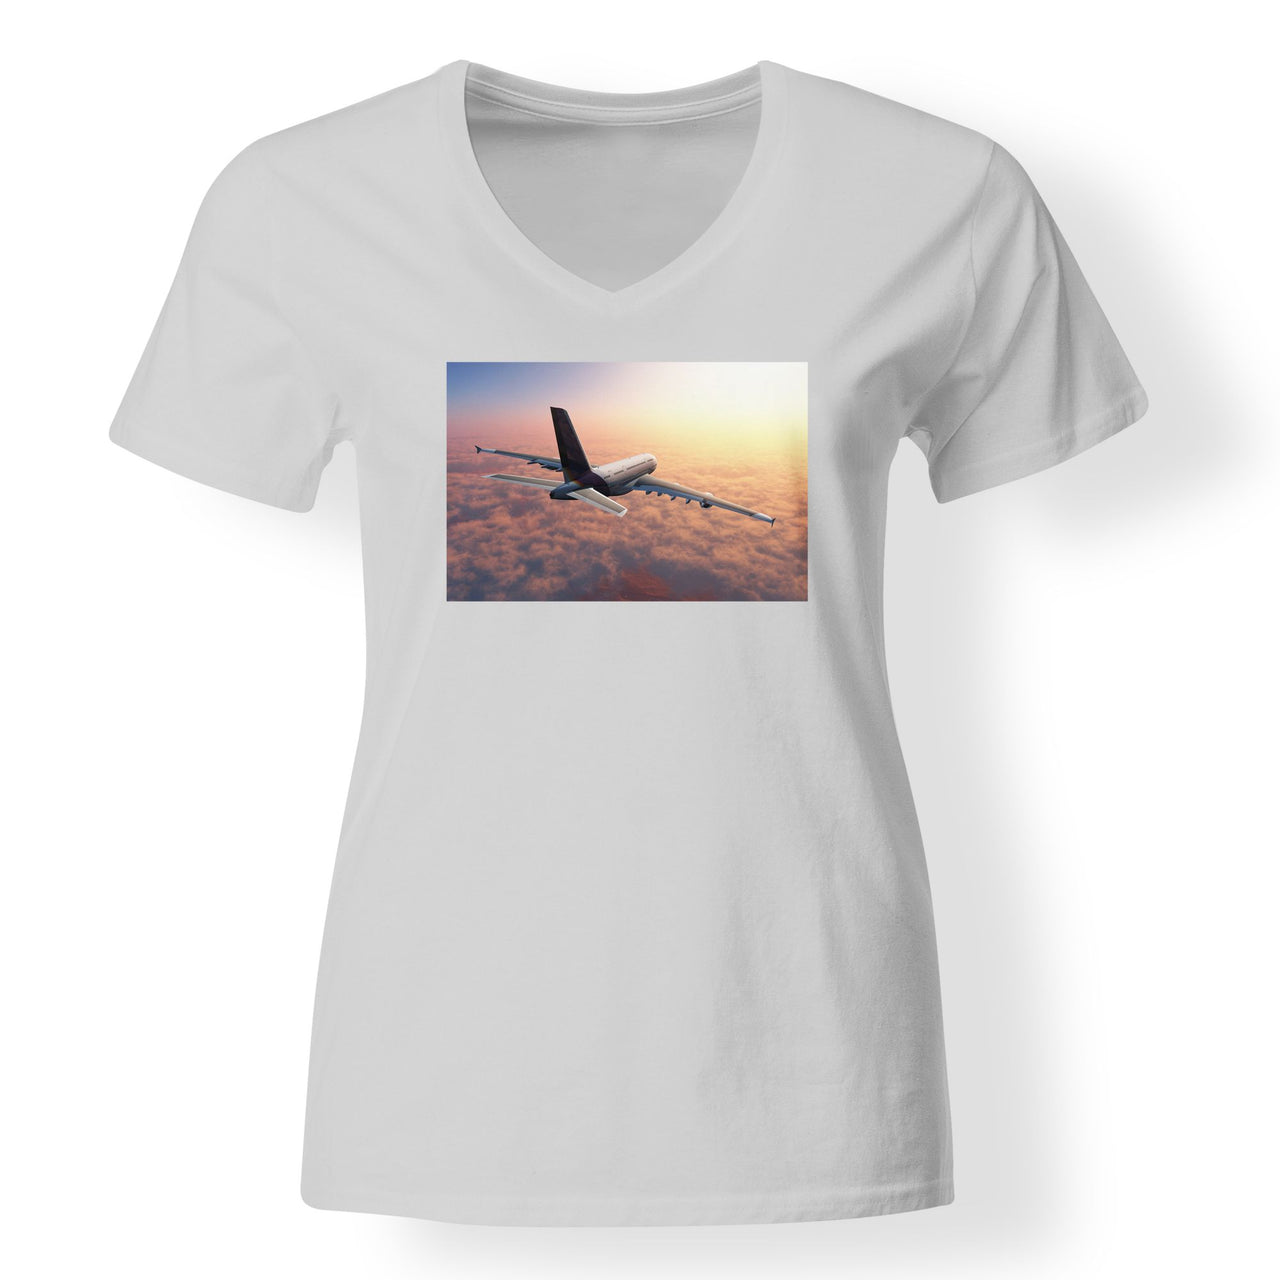 Super Cruising Airbus A380 over Clouds Designed V-Neck T-Shirts